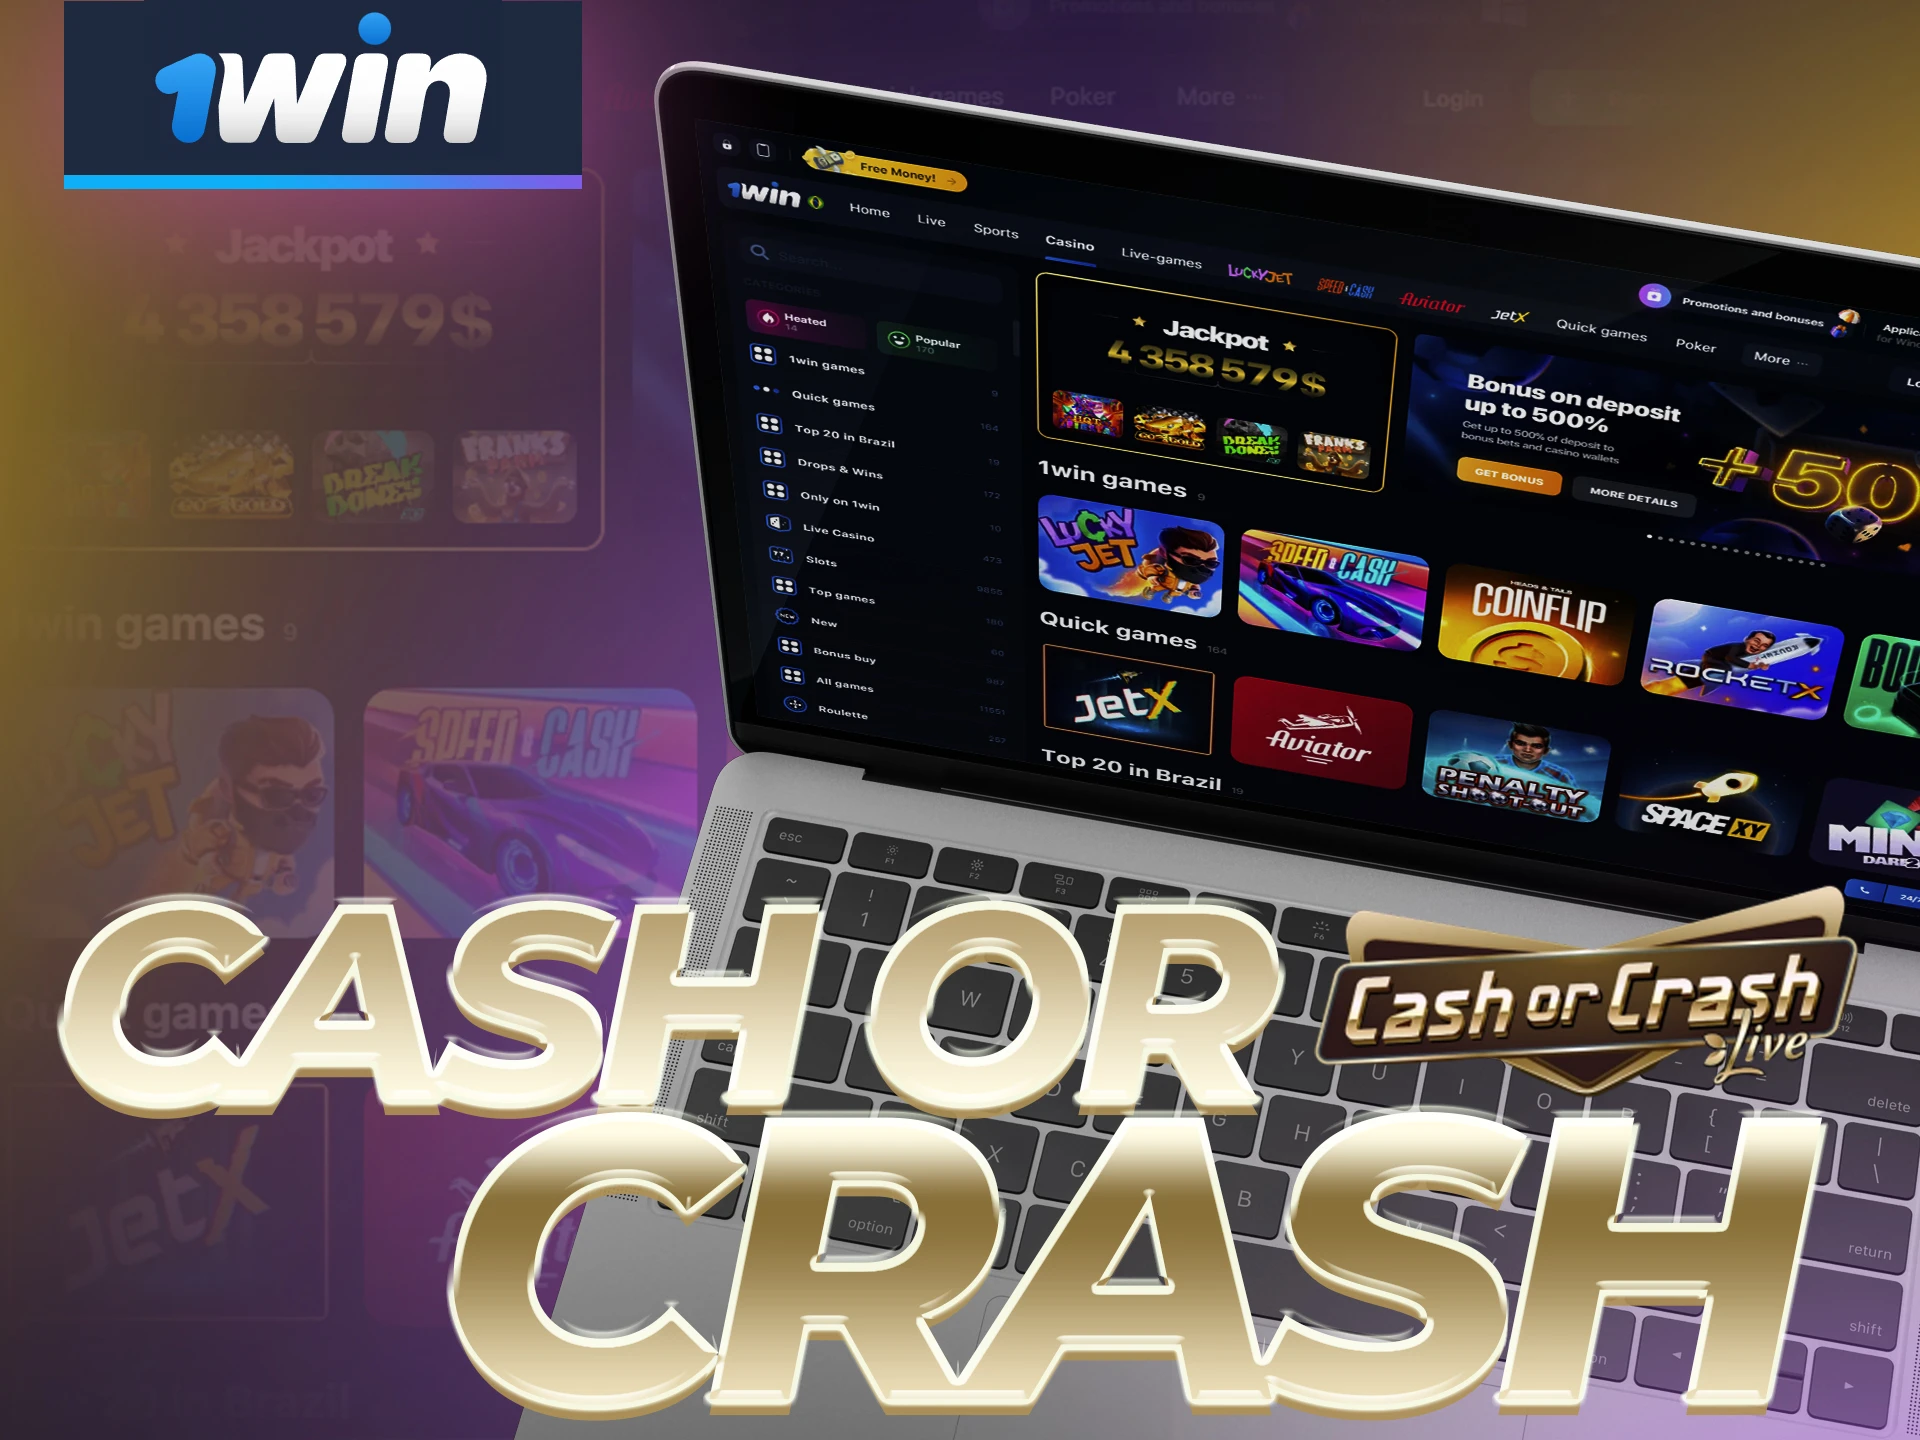 Try playing Cash or Crash at 1win.